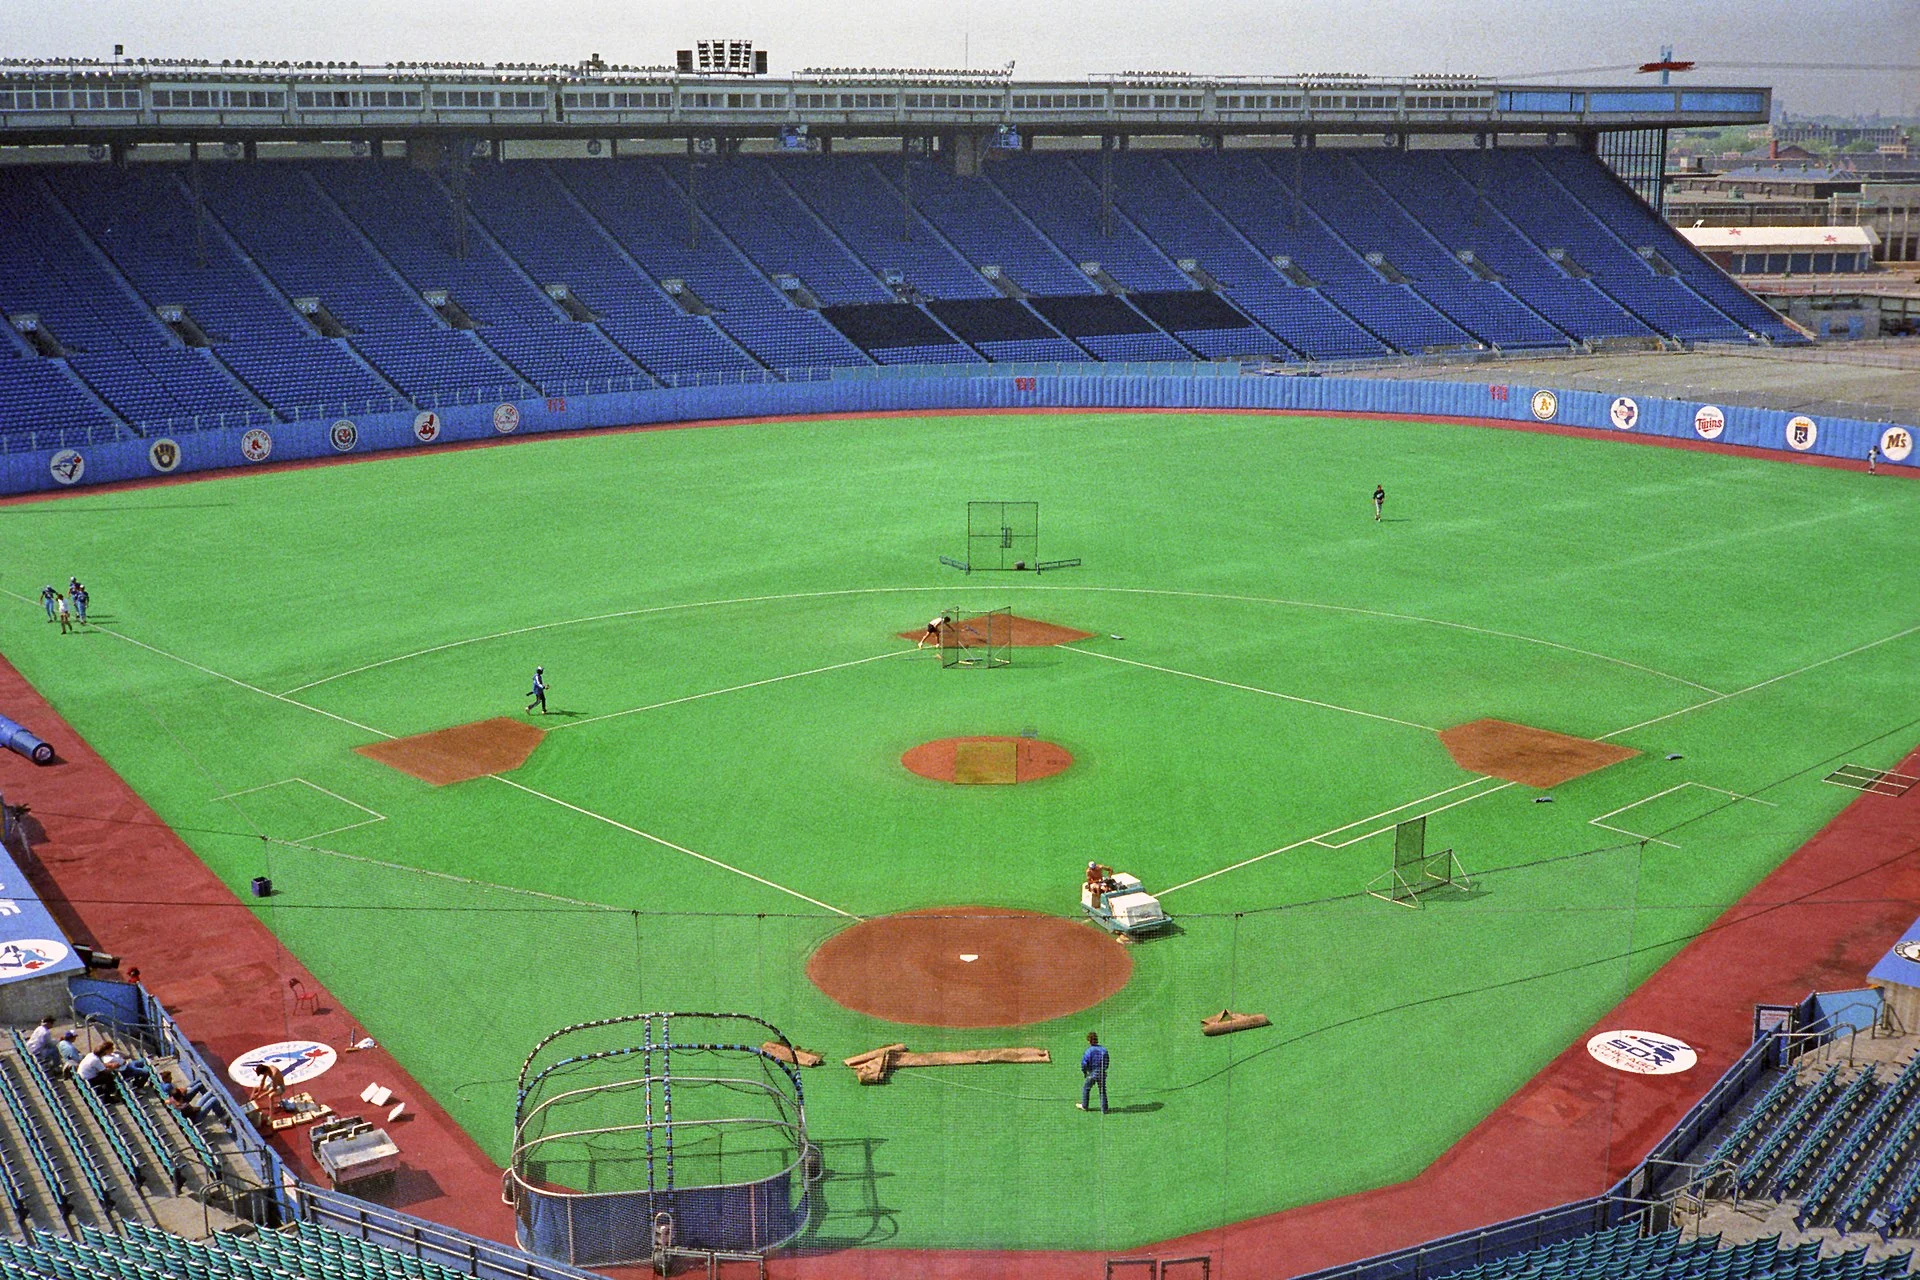 1920px-Exhibition Stadium before the Toronto Blue Jays faced the Chicago White Sox on May 27, 1988 1